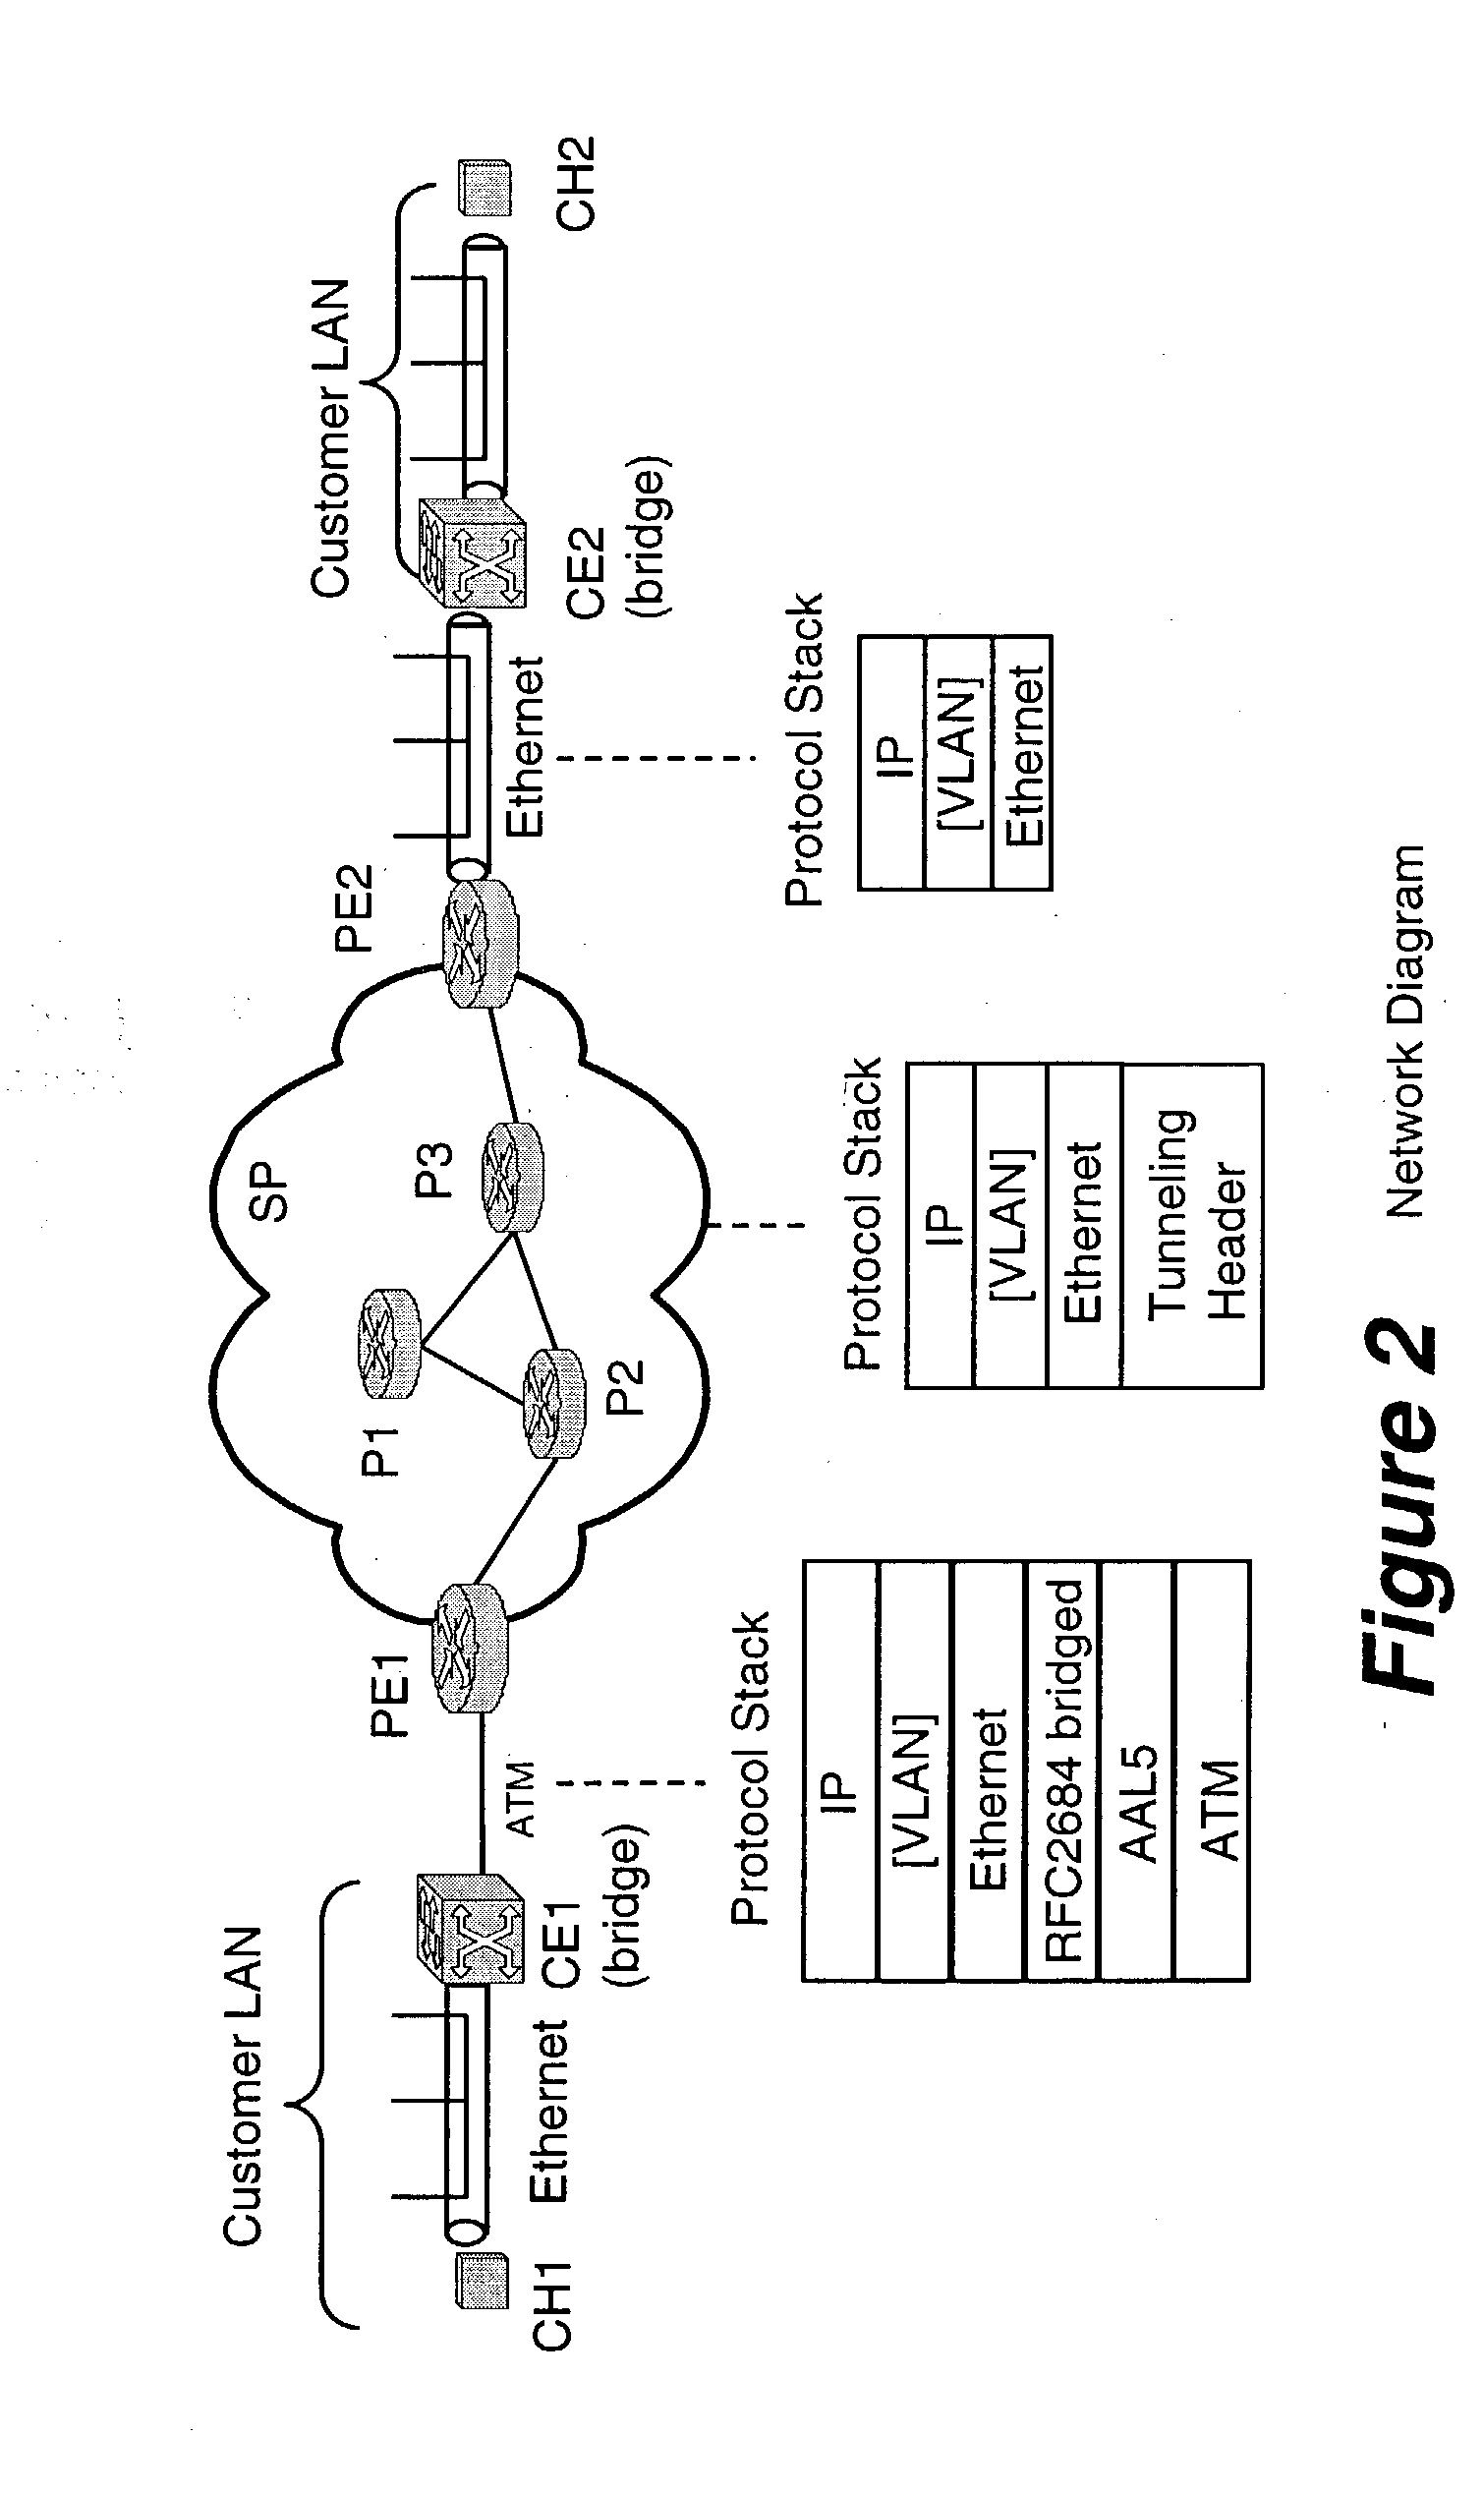 Address resolution in IP interworking layer 2 point-to-point connections